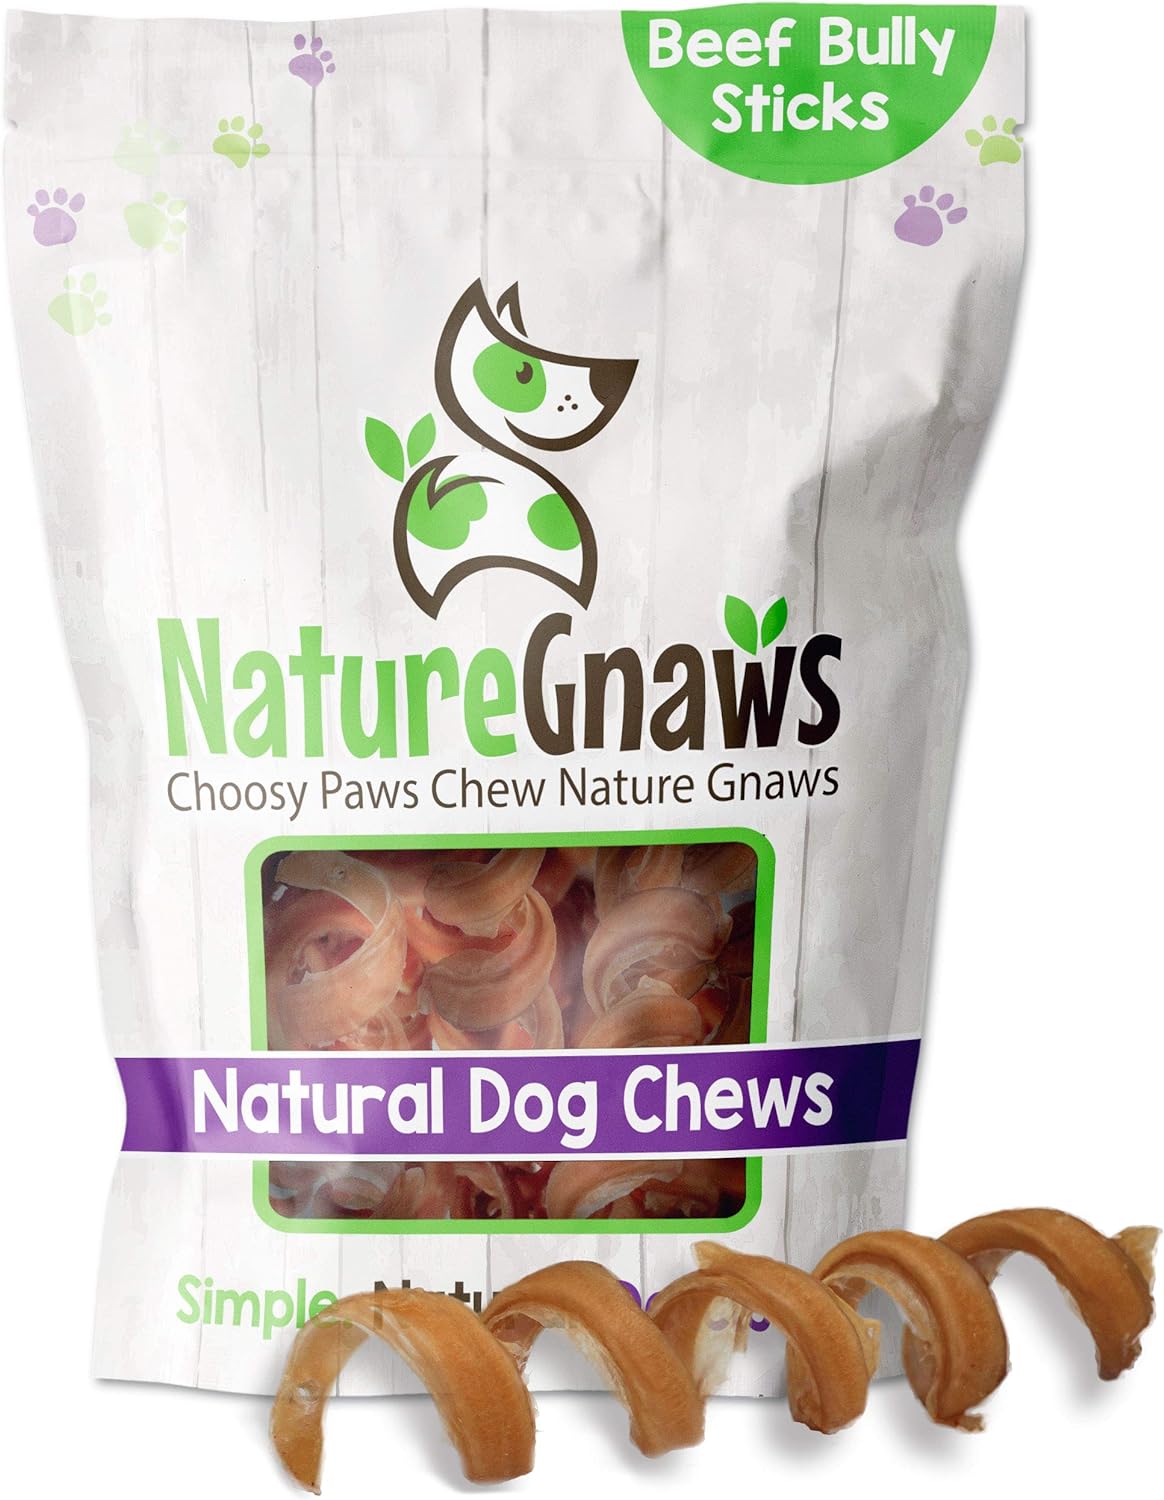 Nature Gnaws Bully Stick Springs for Dogs - Premium Natural Beef Dental Bones - Long Lasting Curly Dog Chew Treats for Aggressive Chewers - Rawhide Free 12 Count (Pack of 1)